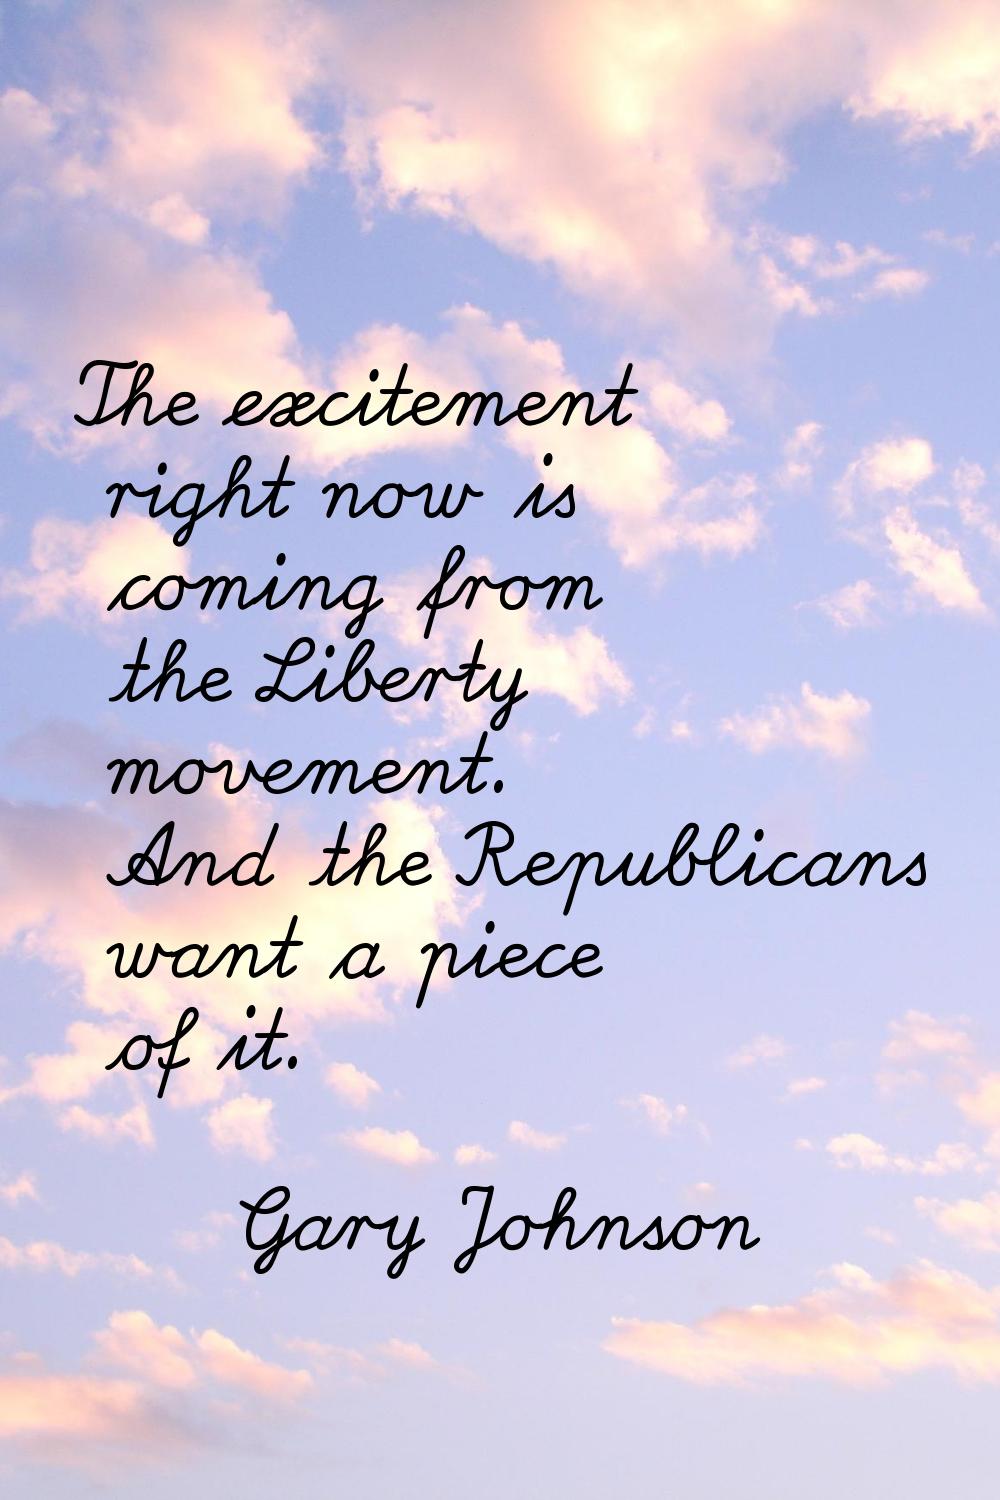 The excitement right now is coming from the Liberty movement. And the Republicans want a piece of i